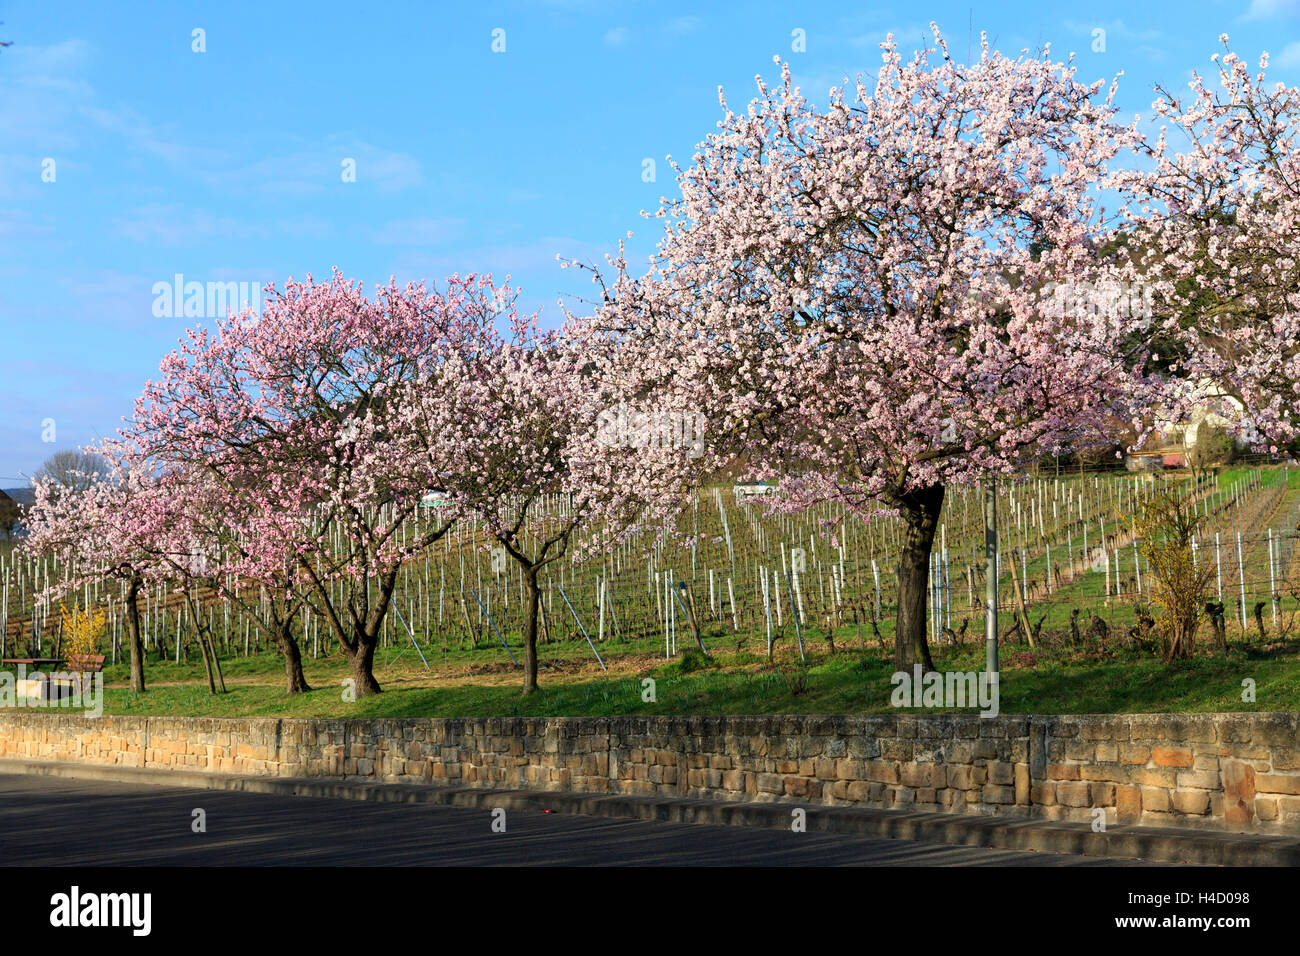 blossoming almond trees, Prunus dulcis, is blossoming, Rhinland Palatinate, Gimmeldingen, Germany, spring, is blossoming, 'Südliche Weinstrasse' Stock Photo